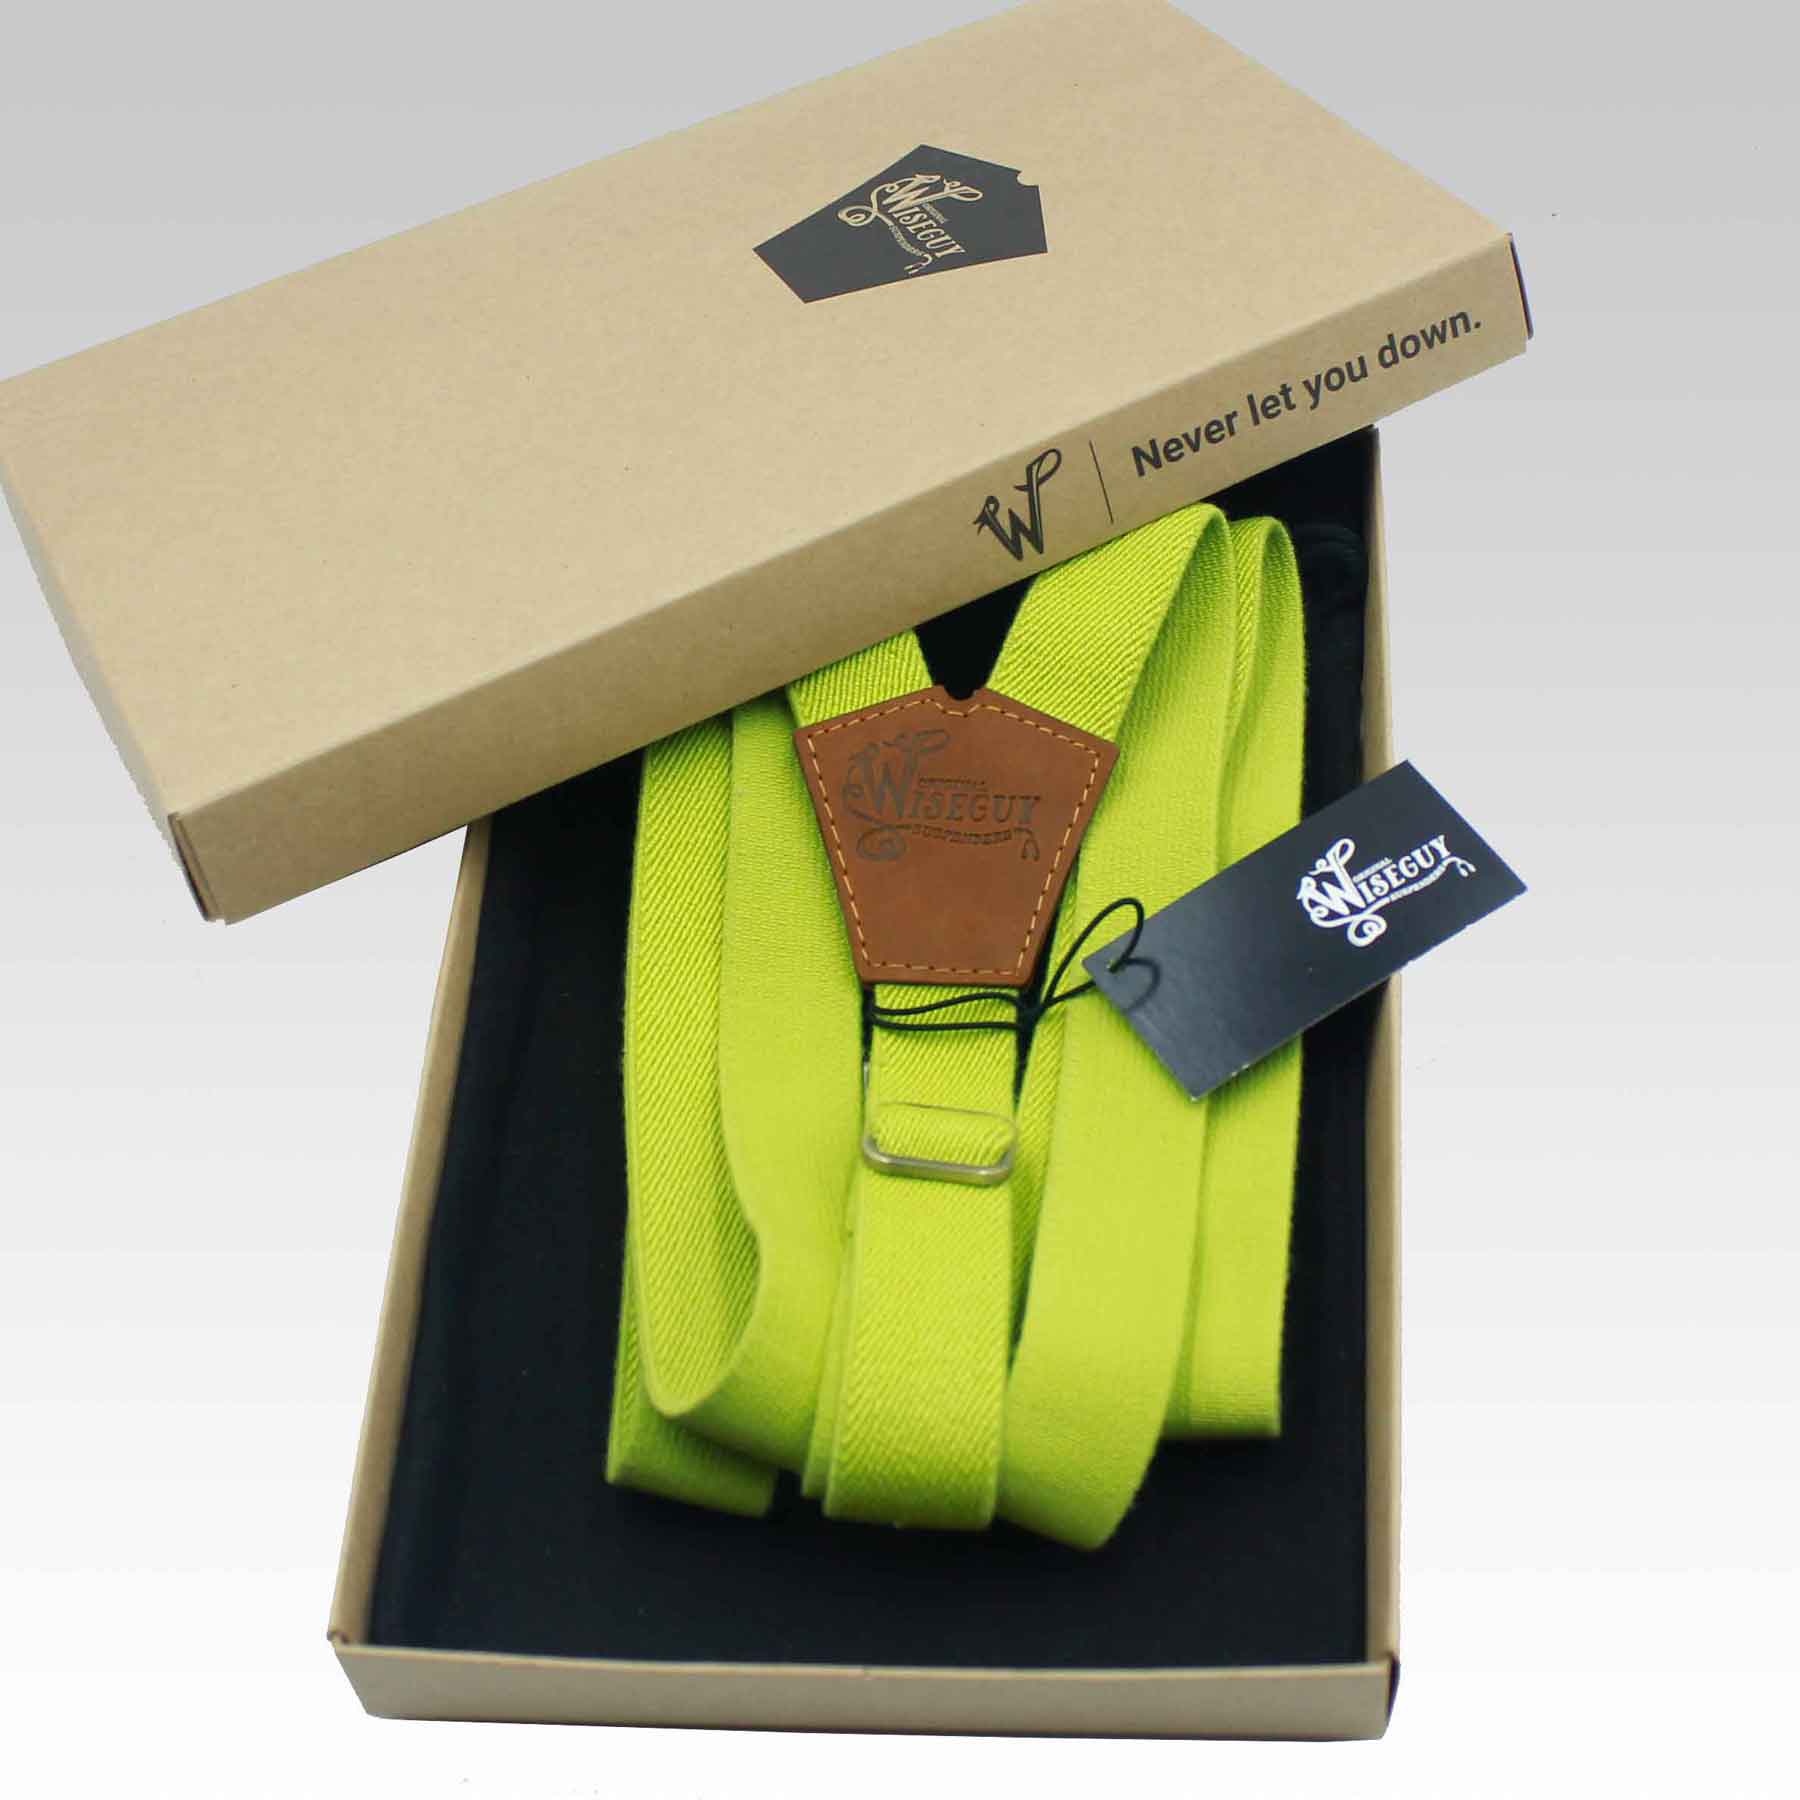 The Lime on Camel Brown Suspenders & Brass slim straps ( 1 inch/ 2.5cm) - Wiseguy Suspenders